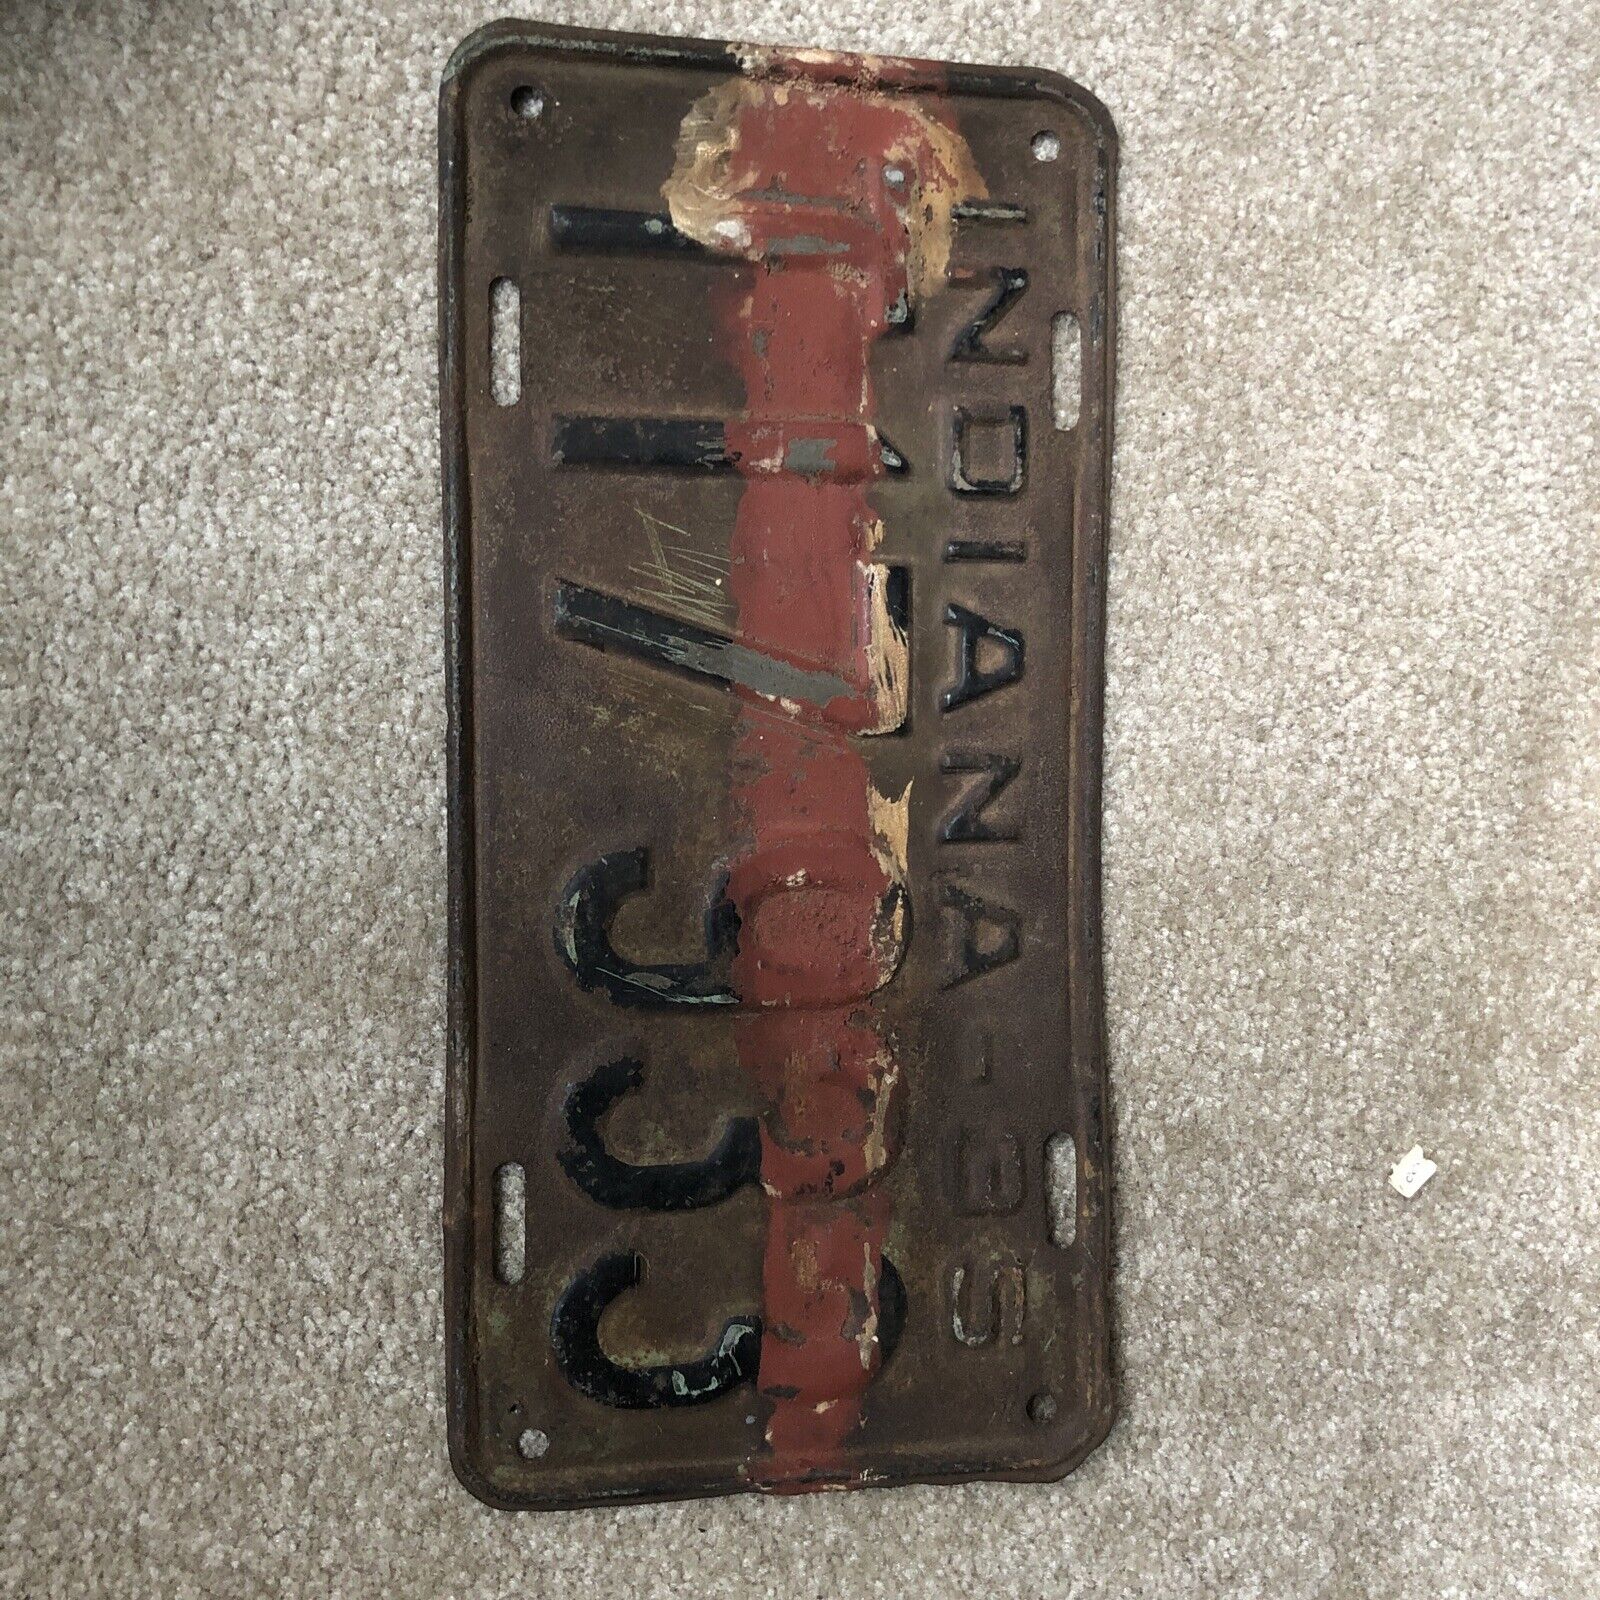 1935 INDIANA License Plate Tag Original T17 933 Truck